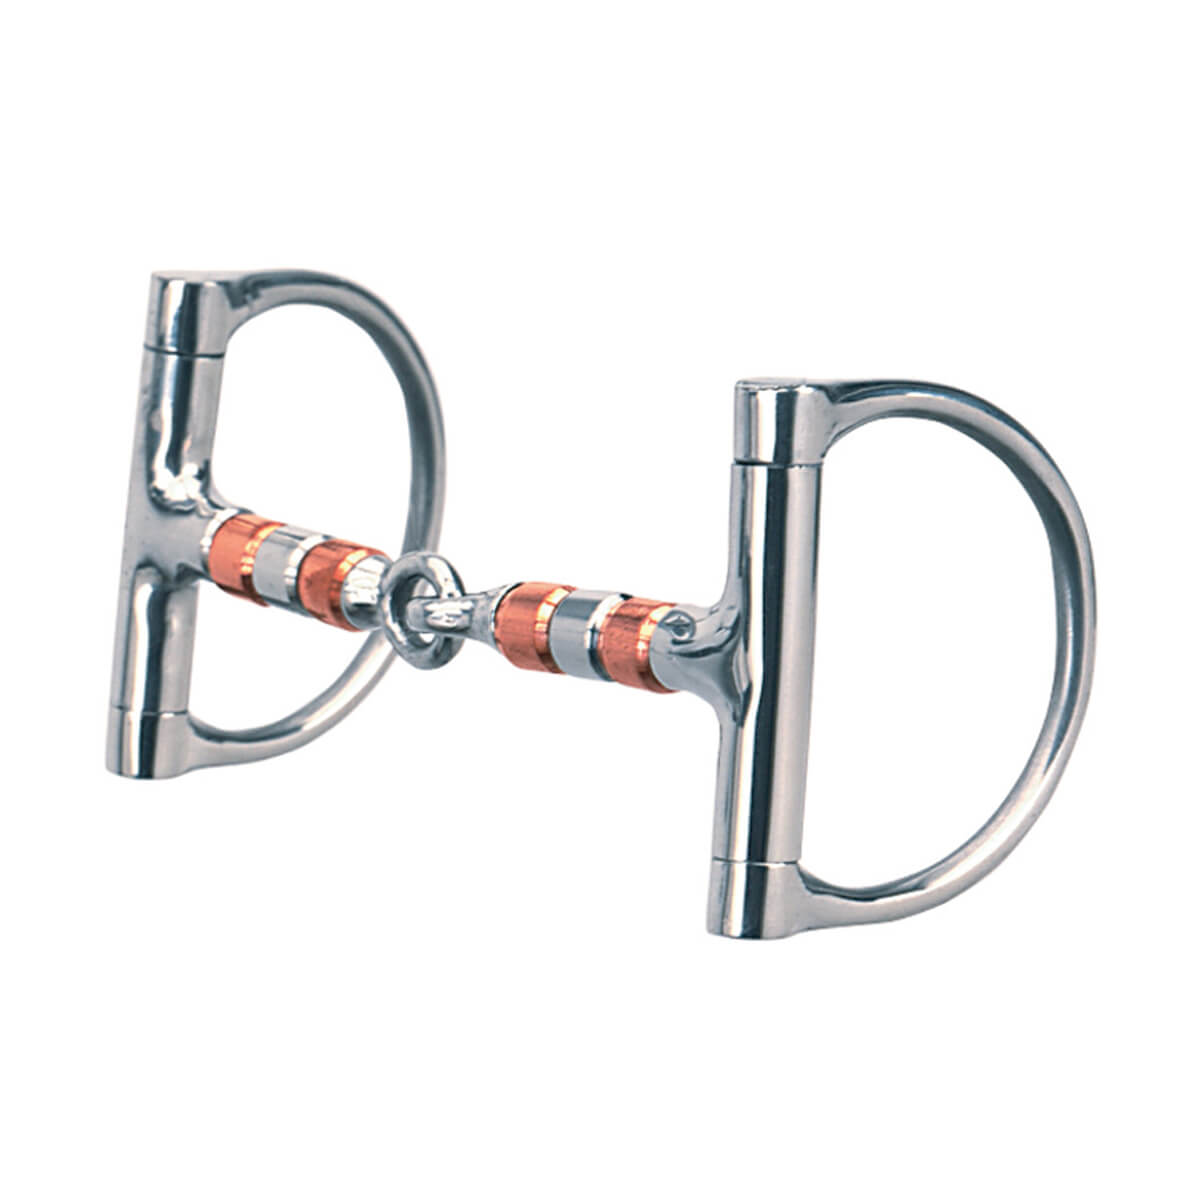 Dee Ring Bit, Roller Mouth - 5-in